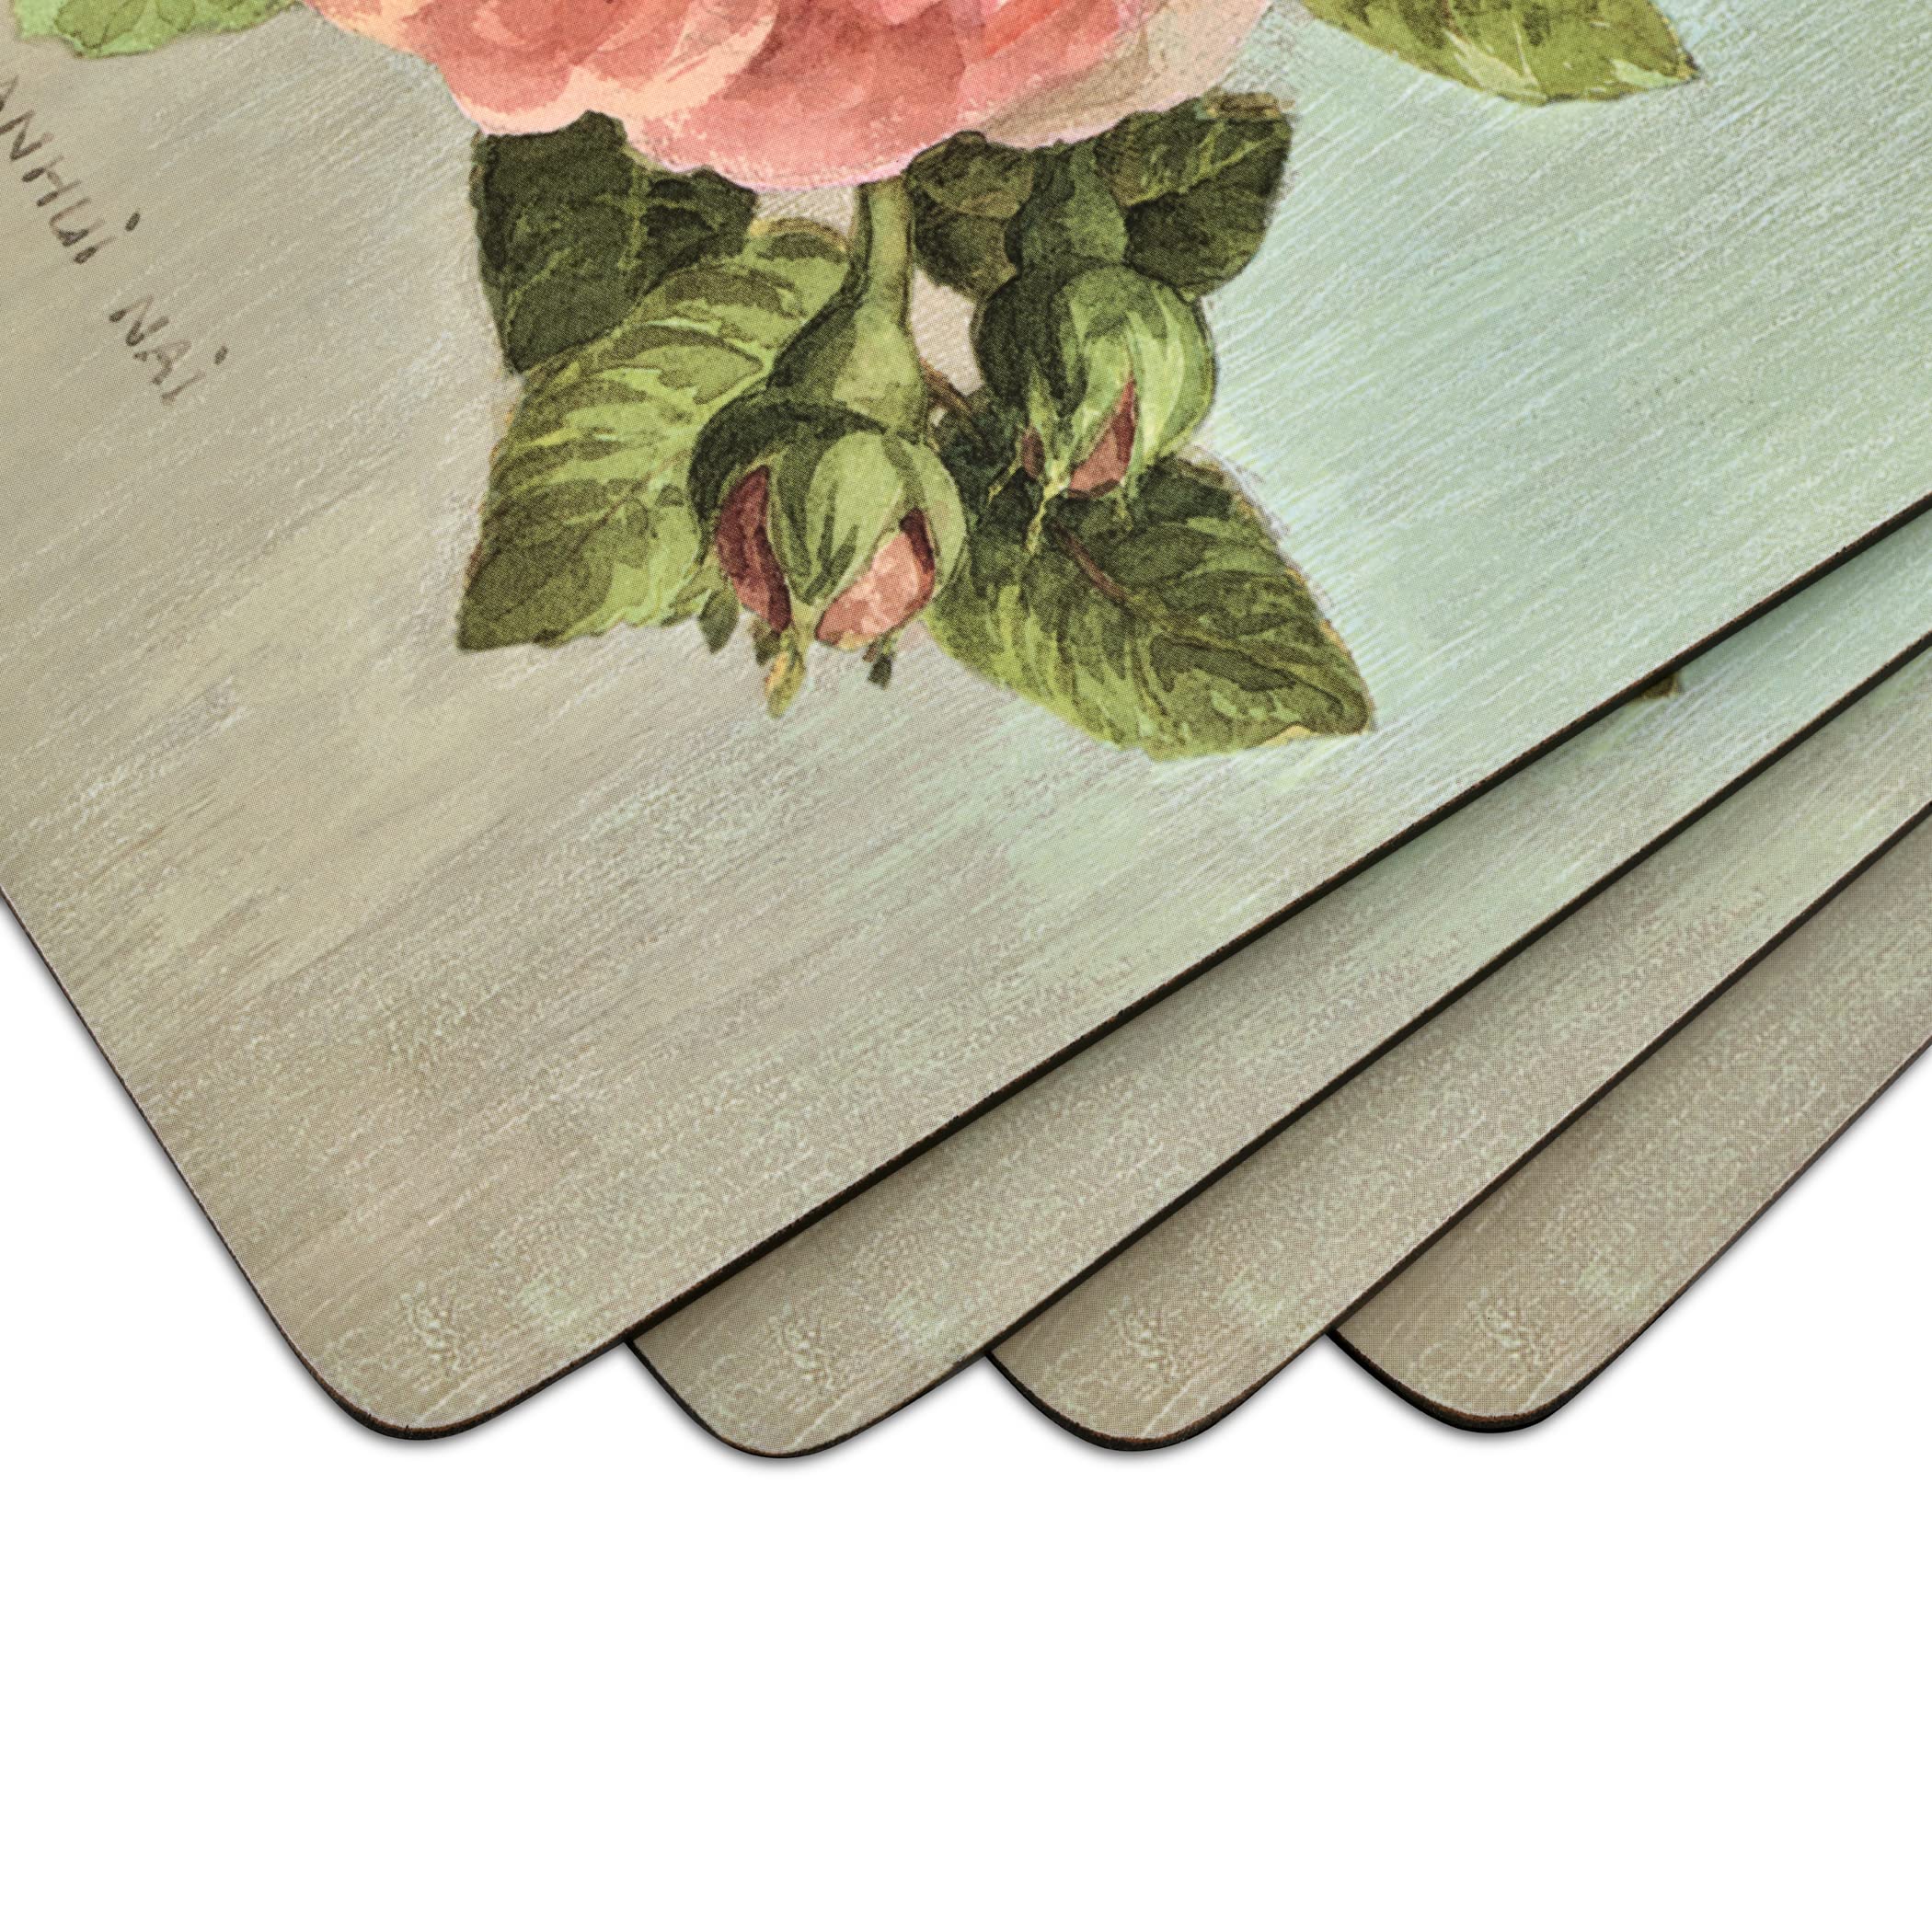 Pimpernel Antique Roses Collection Placemats | Set of 4 | Heat Resistant Mats | Cork-Backed Board | Hard Placemat Set for Dining Table | Measures 15.7” x 11.7”